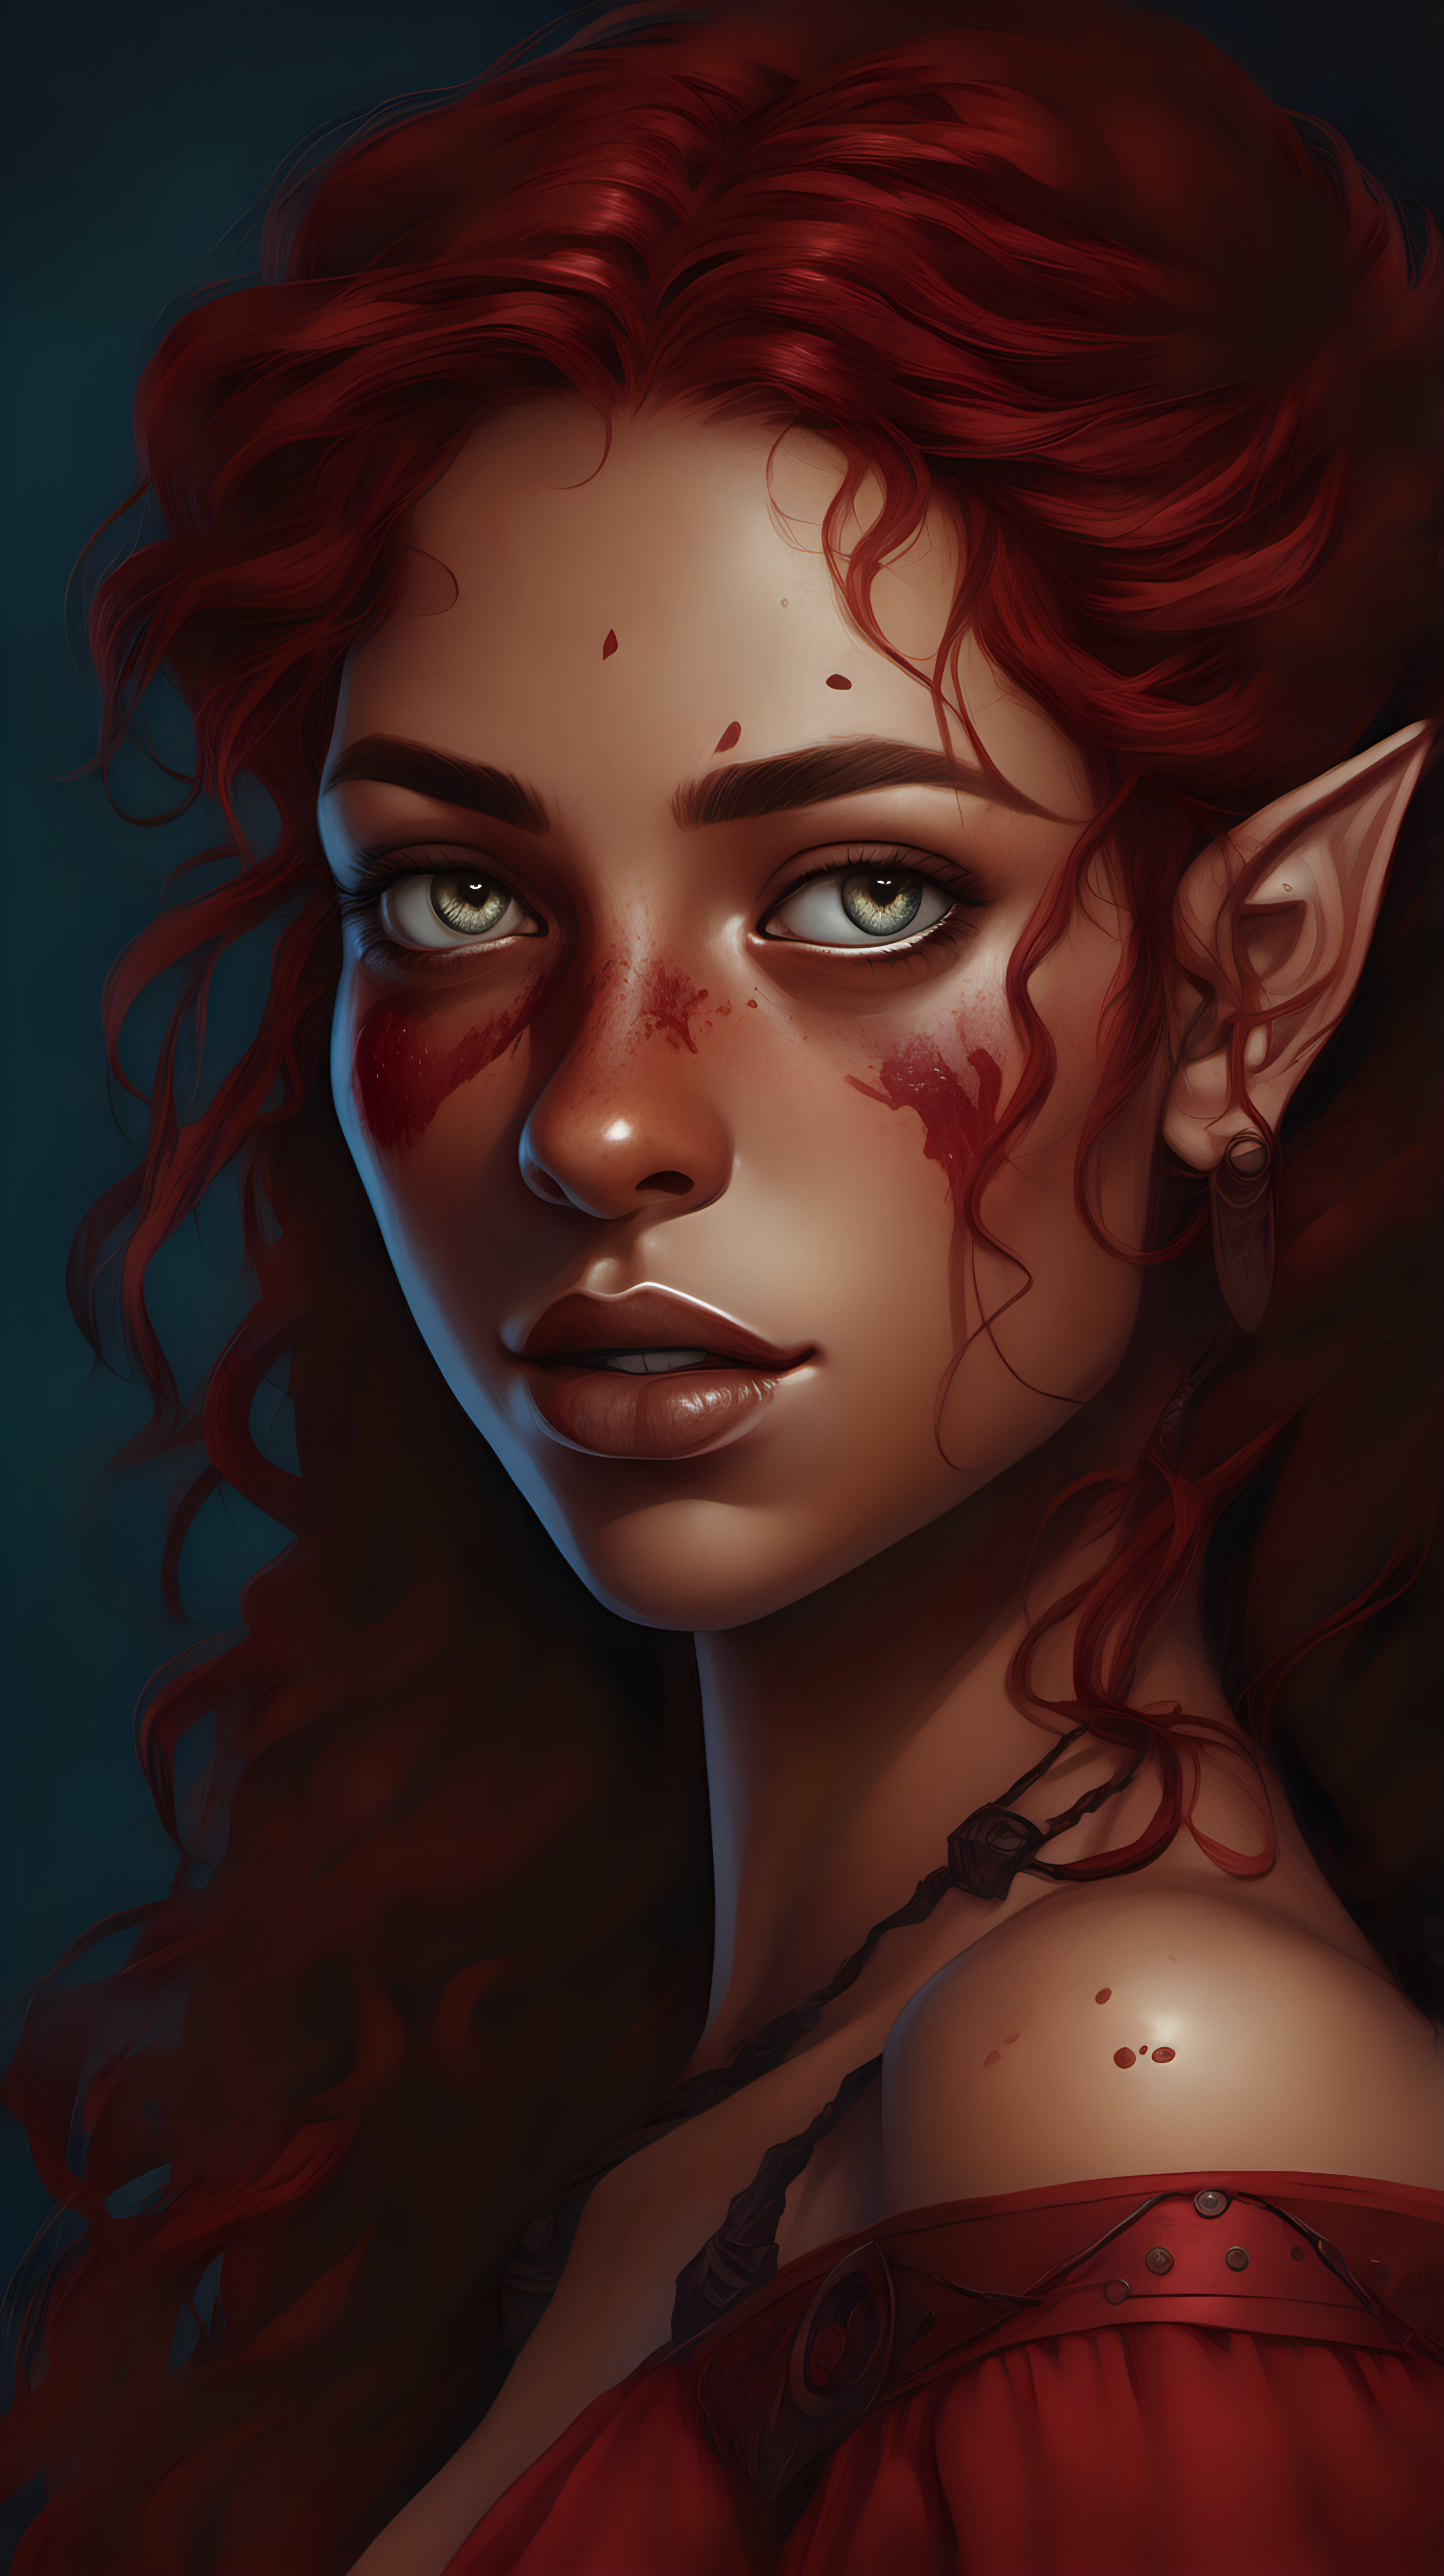 A half-elf woman with tan skin and freckles. Her left eye is blue and her right eye has a red iris and a black sclera. Her hair is dark red and curly. She is wearing a red dress. She has dark red lips and a scar on the side of her lips. 